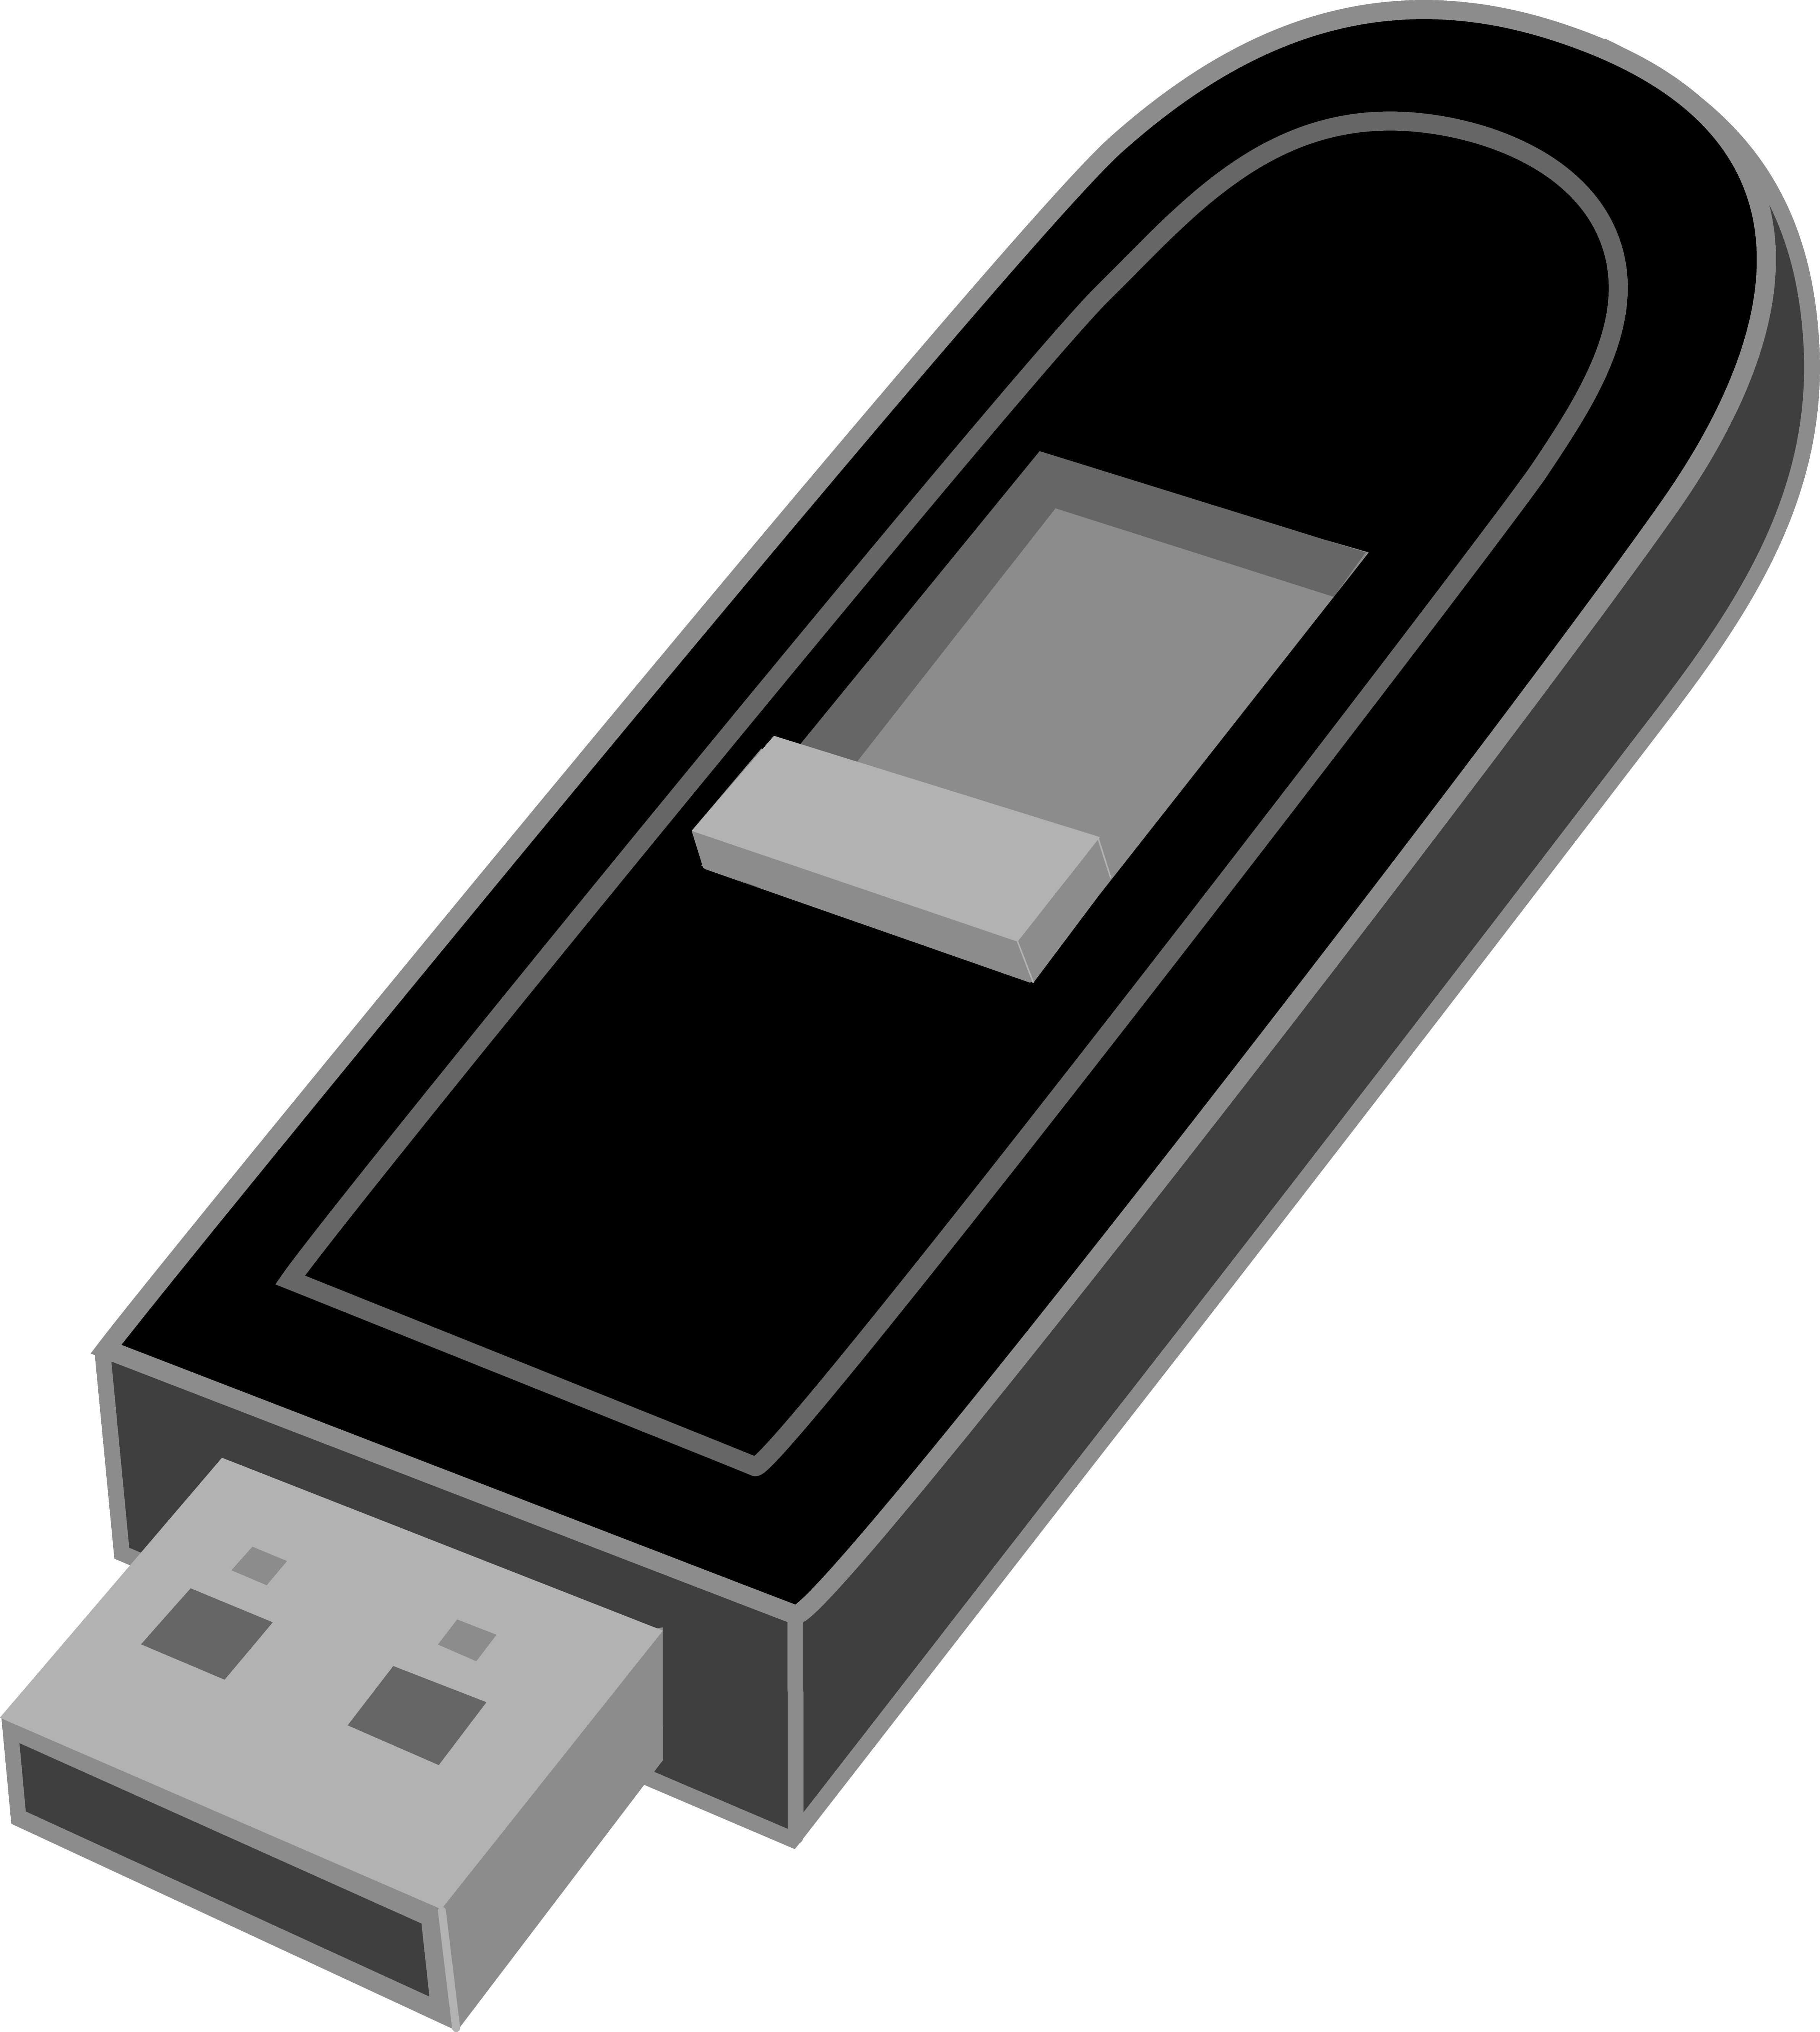 Download - Flash Drive Black And White (4760x5314)